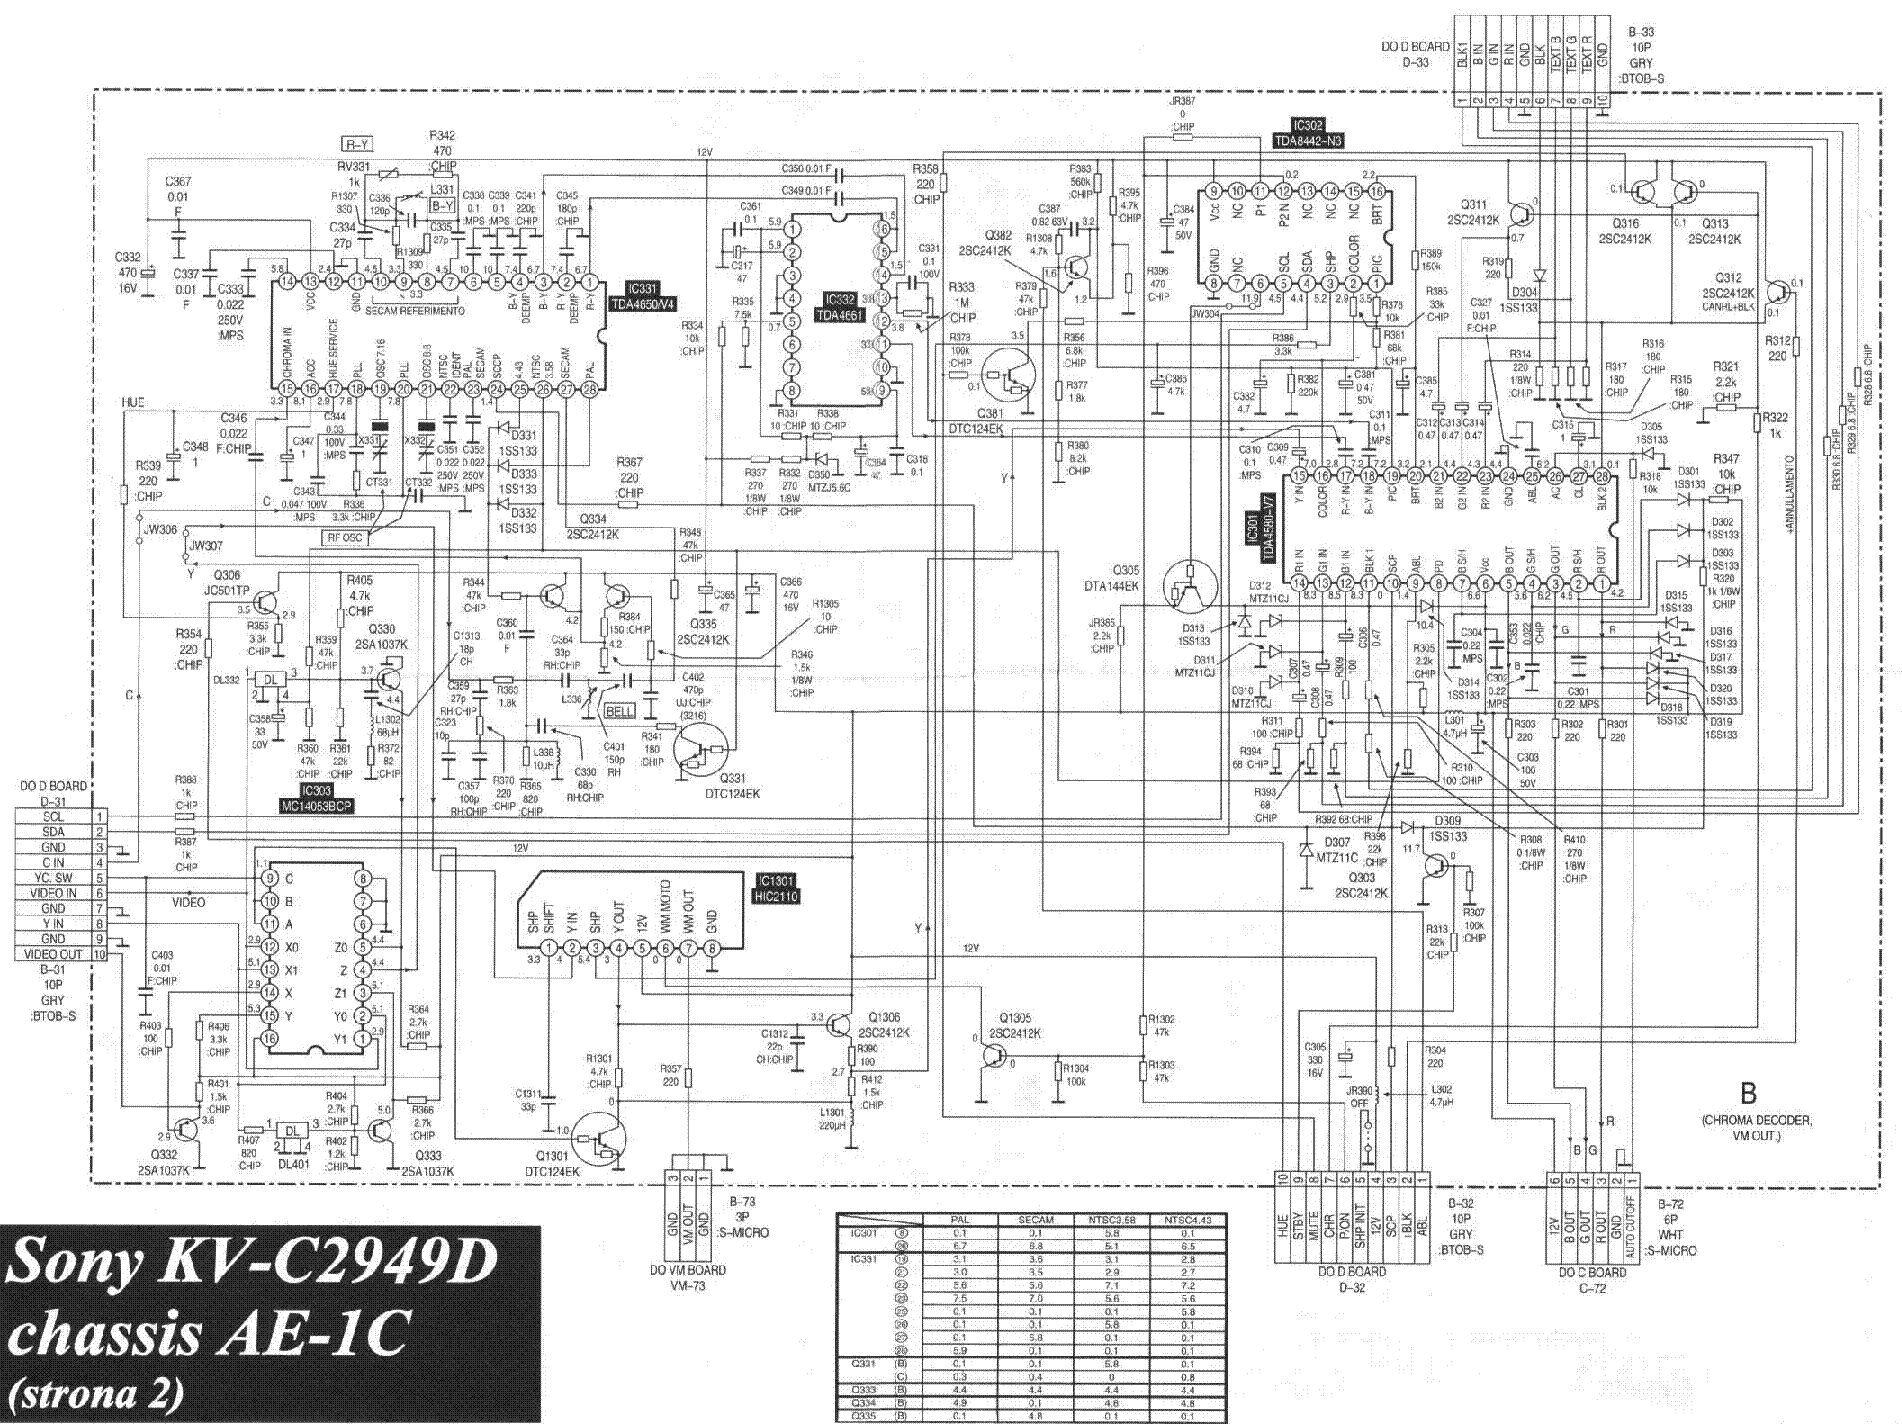 SONY KVC 2949D CHASSIS AE-1C service manual (2nd page)